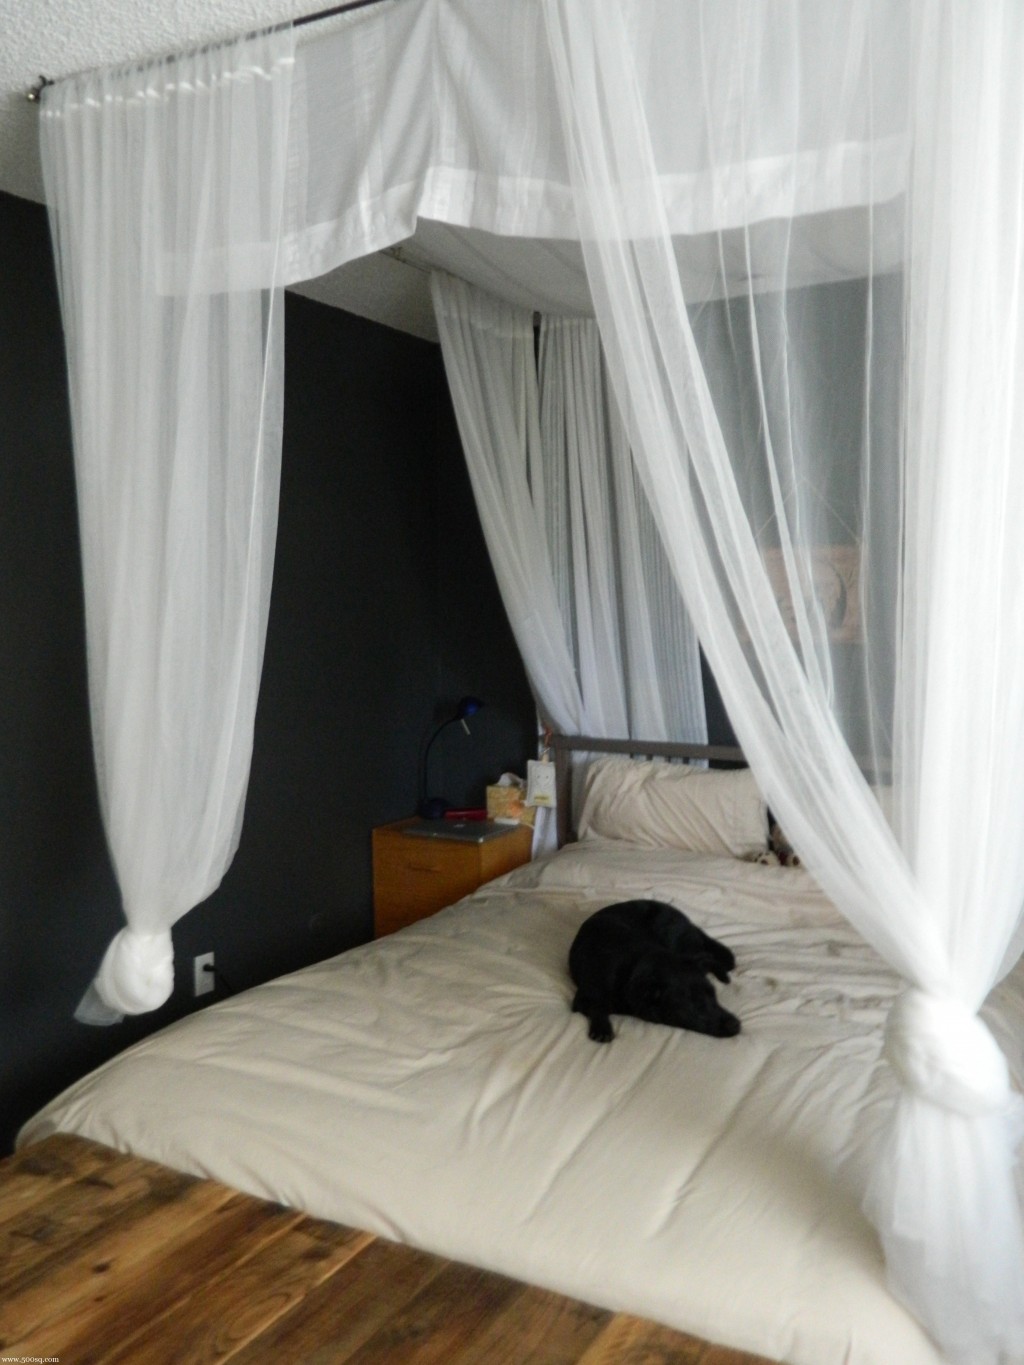 Diy Canopy Bed Curtains in Curtain